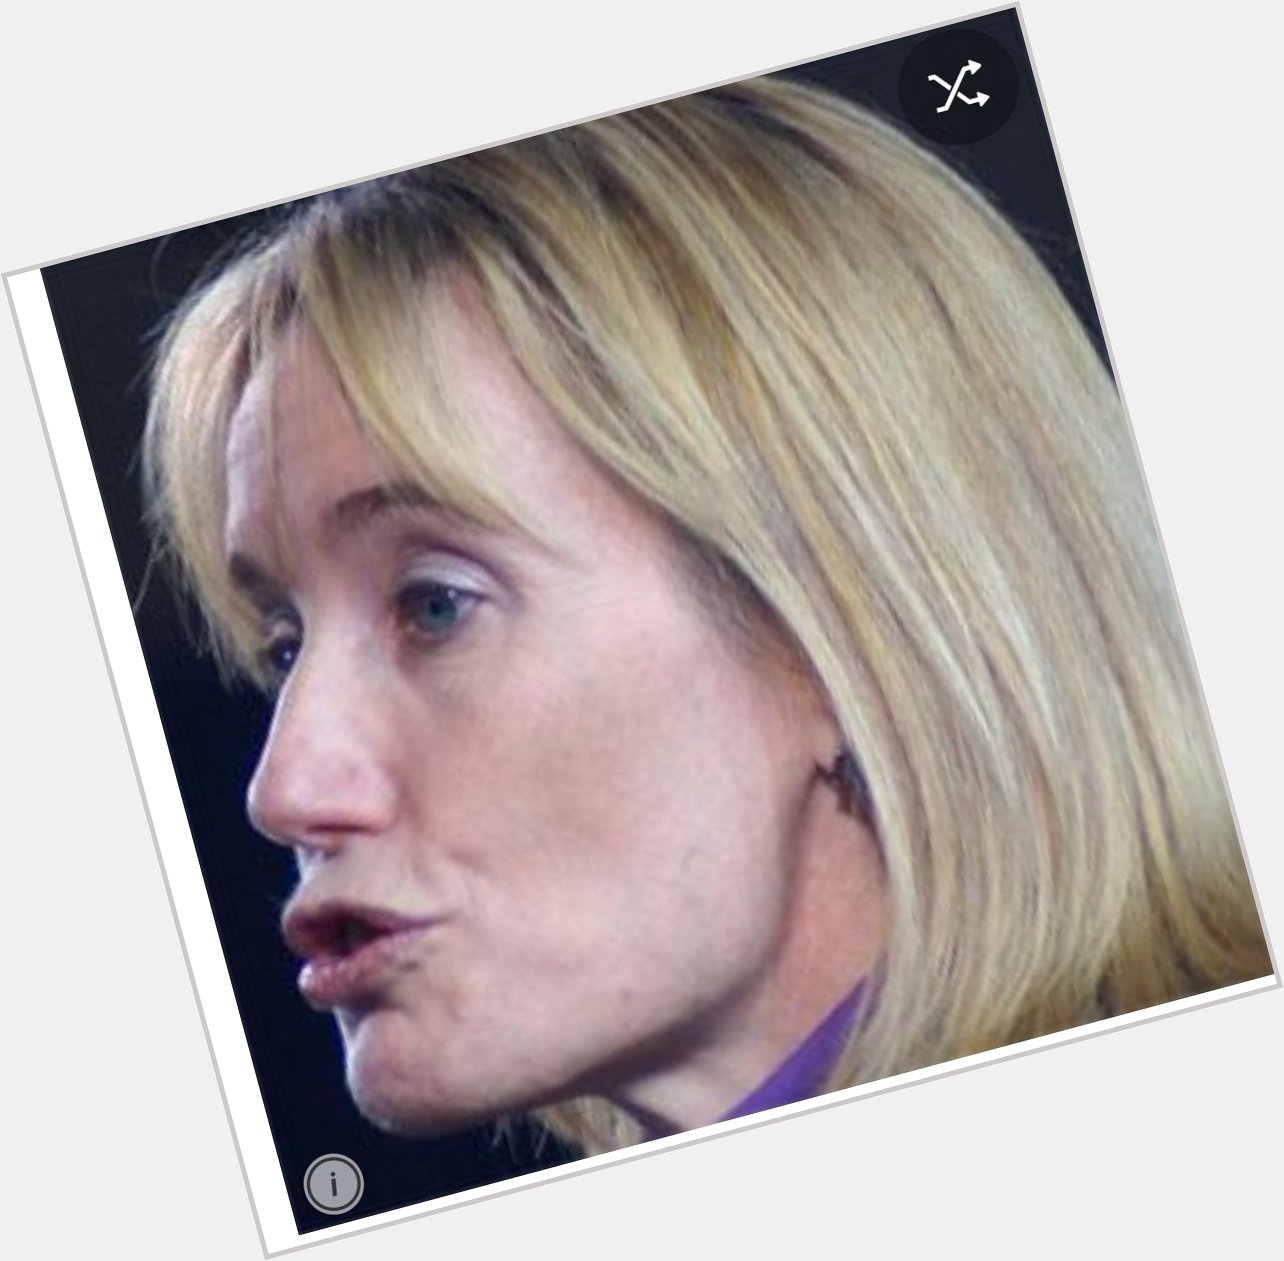 And another politician is having a birthday.  Happy Birthday to Maggie Hassan from New Hampshire 